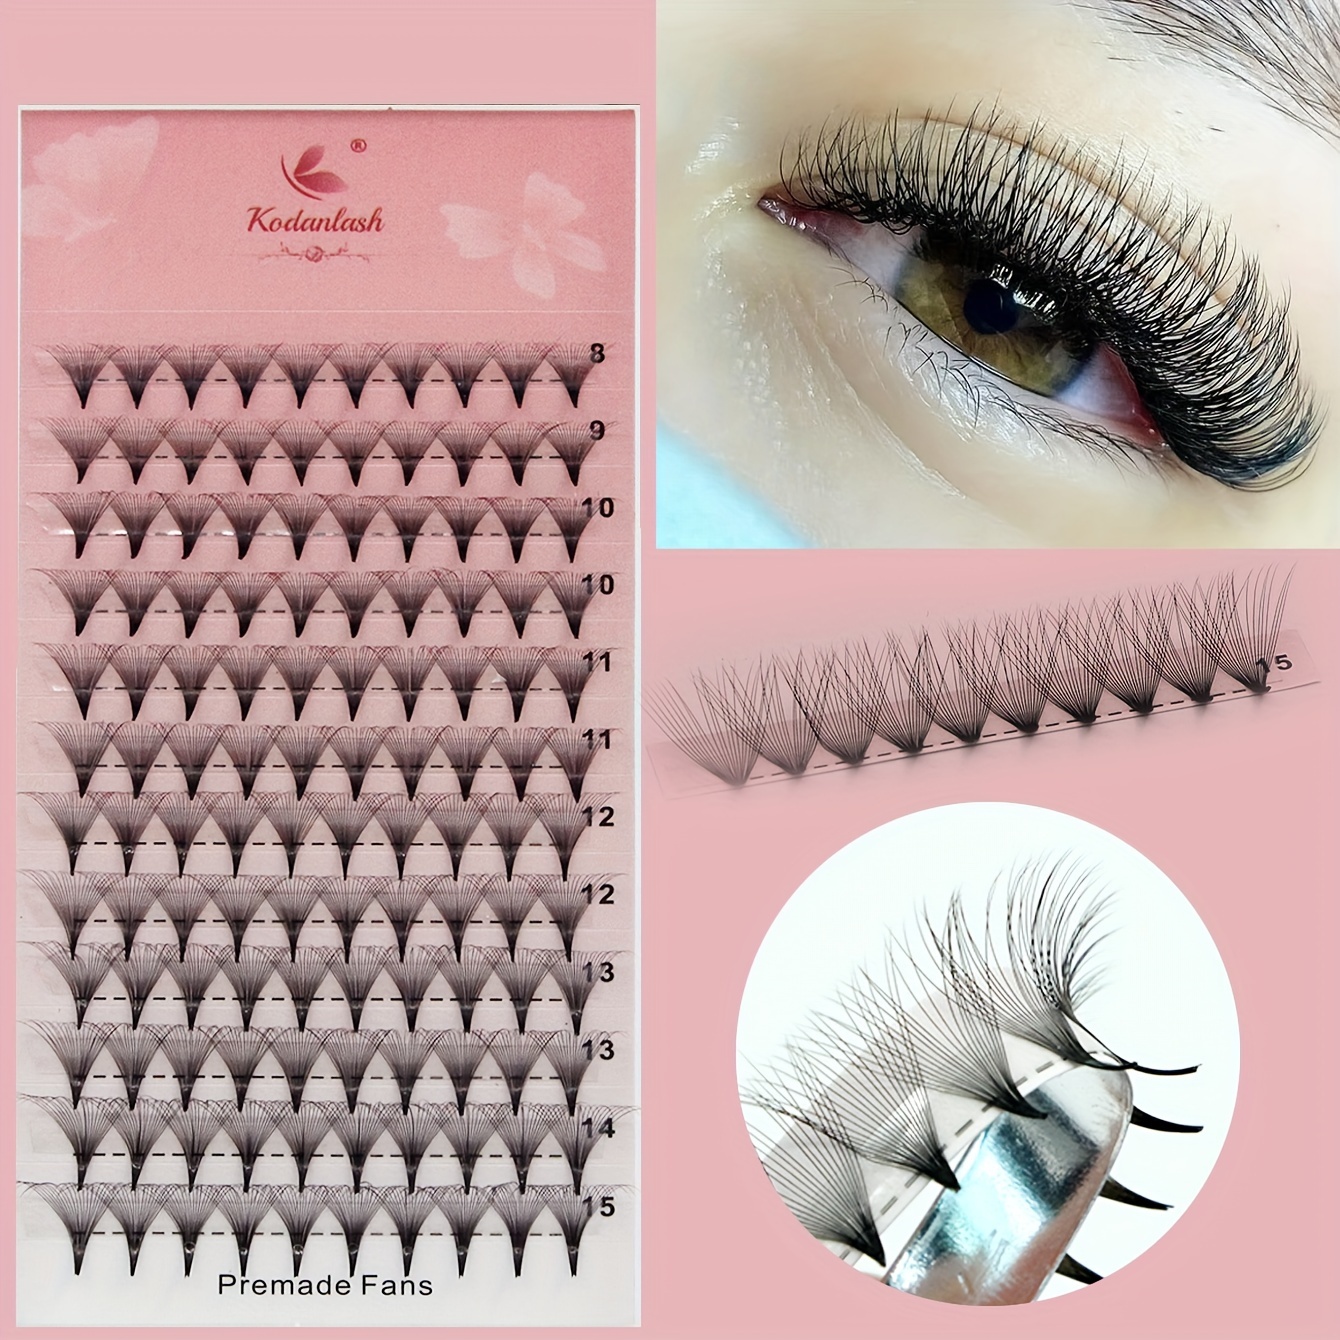 

Premade Fans Eyelash Extensions 20d Thickness 0.07 C/d Curling 8-15mm Mix Short Stem Pointy Base Premade Volume Lash Extensions (20d-c-0.07, 8-15mm Mix)